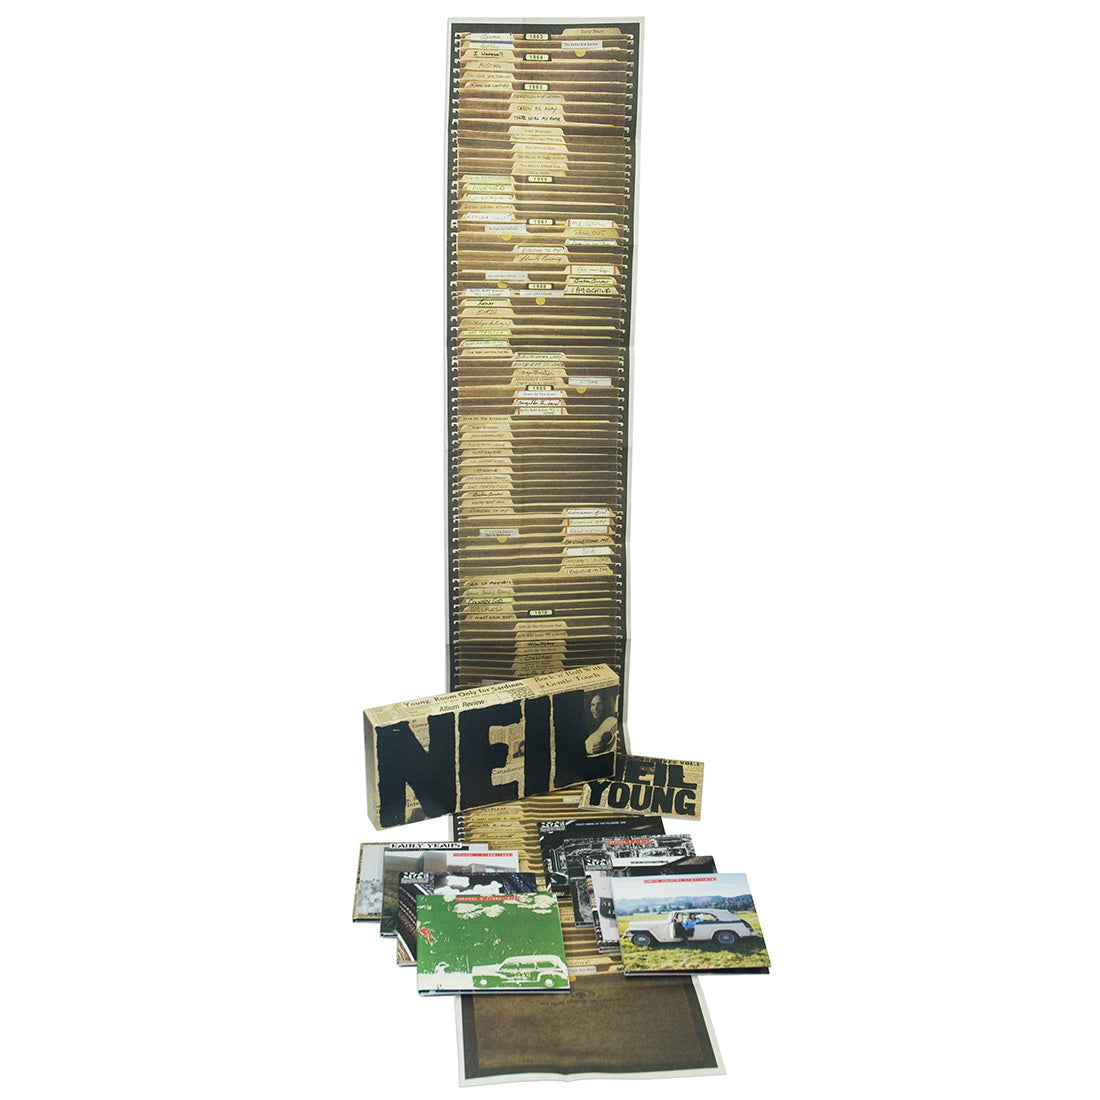 Neil Young - Archives Volume 1: 8CD Box Set